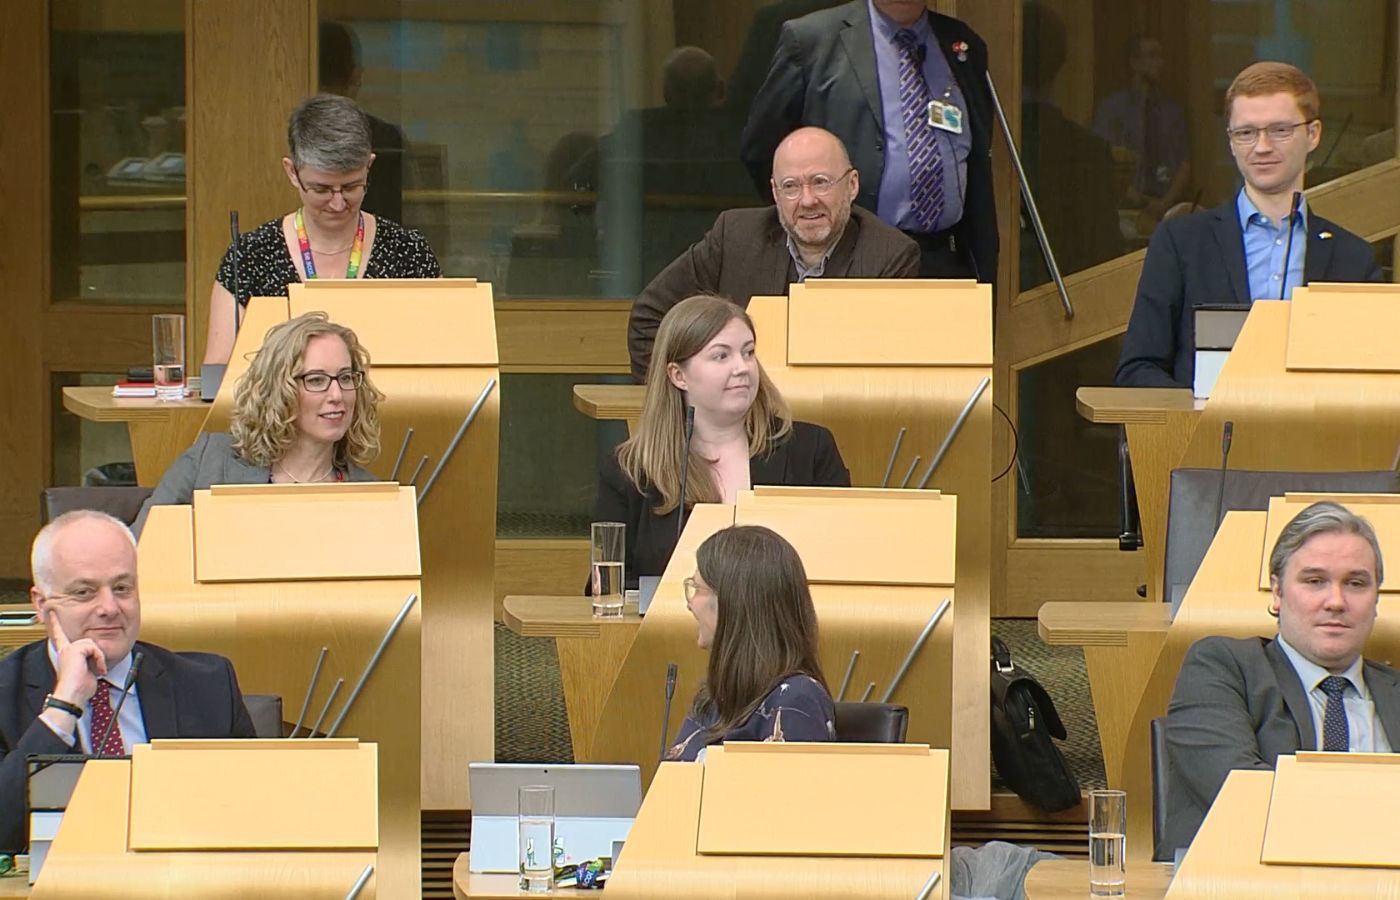 Scottish Green MSPs watch as SNP MSP Fergus Ewing criticises their plans for a transition from fossil fuels.